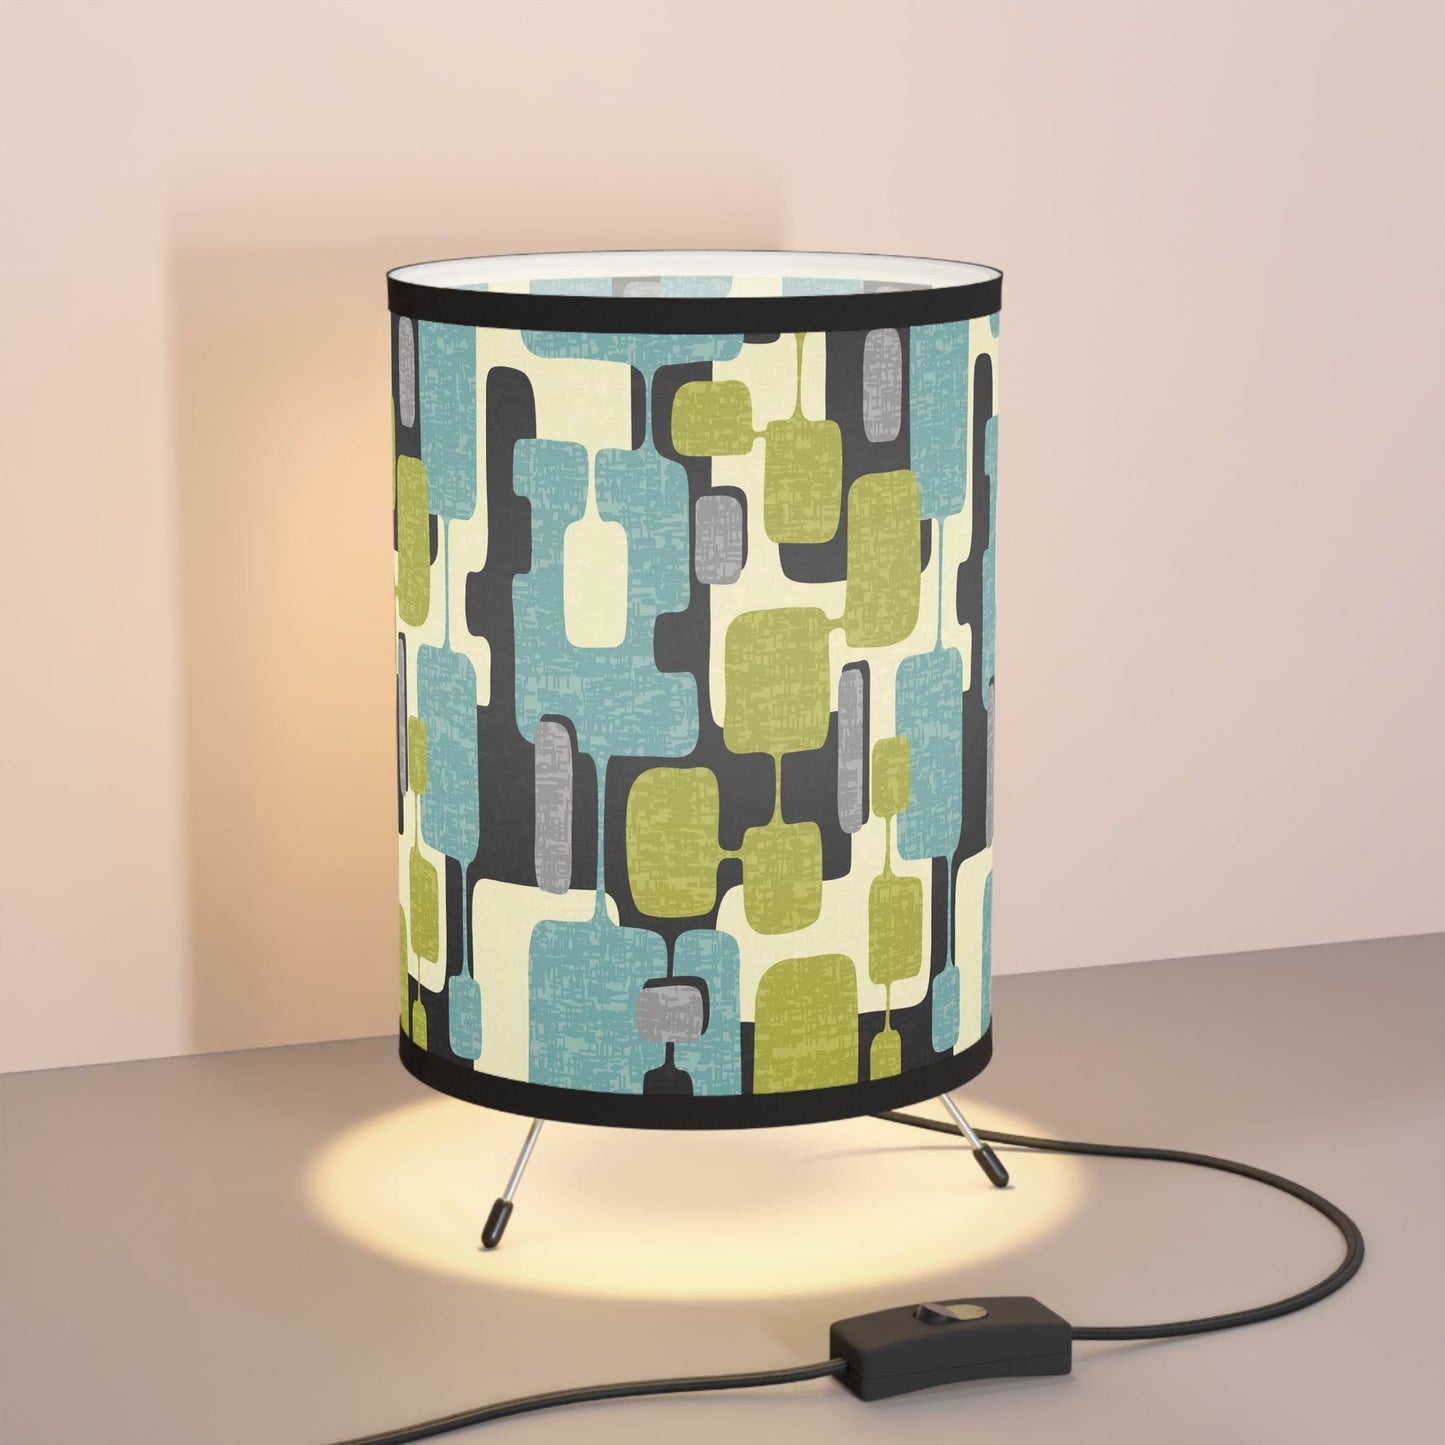 Kate McEnroe New York Mid Century Modern Abstract Tripod Lamp, Retro Teal, Lime Green, Gray, Black MCM Desk Lamp, Vintage Style Geometric Accent Lamp Lamps One size / Black 23244726713903750746